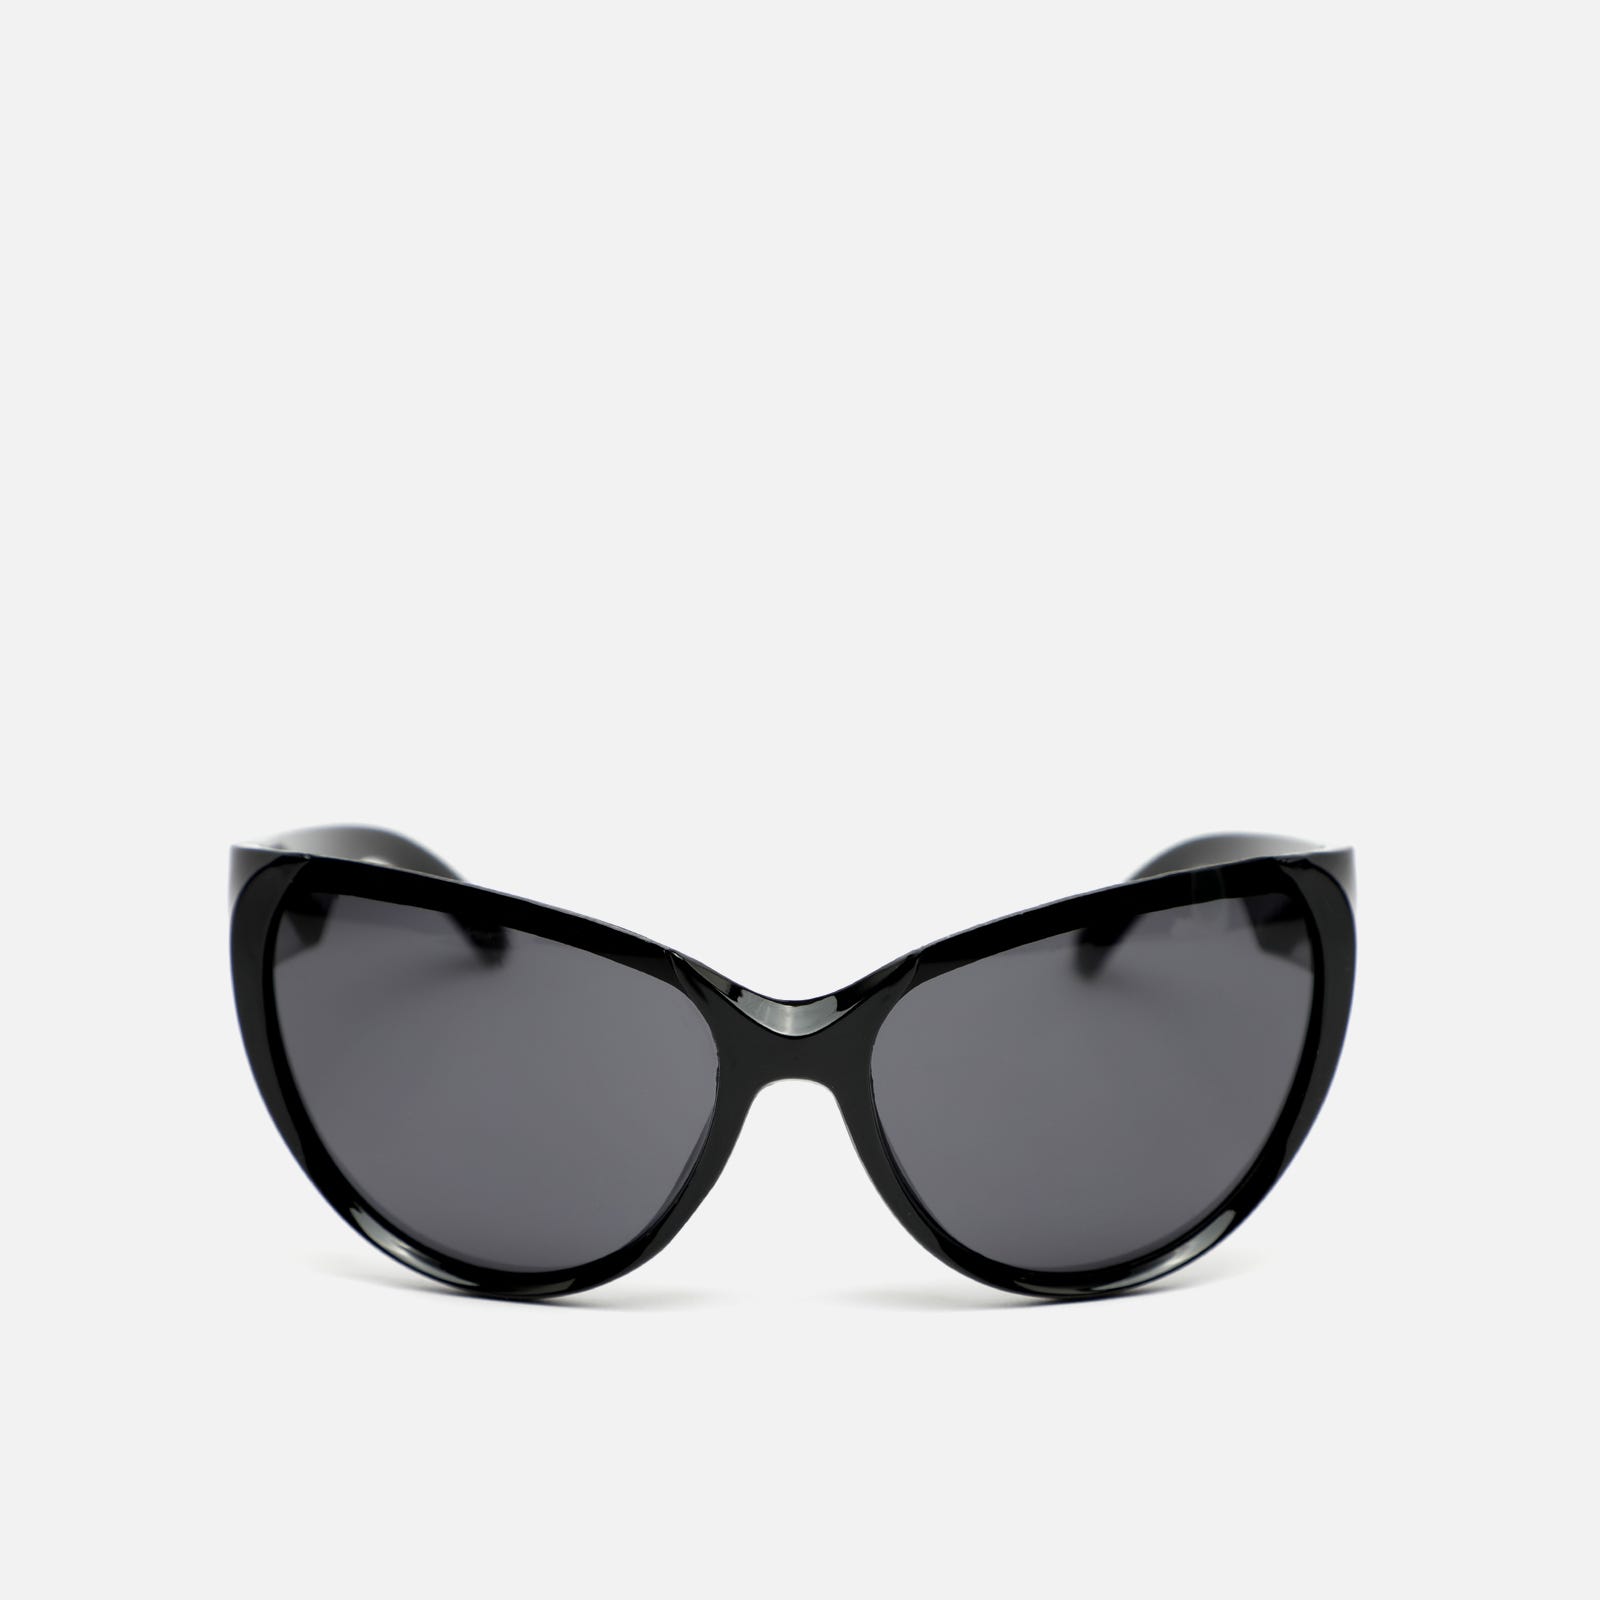 Fly cat-eye sunglasses with acetate frames 